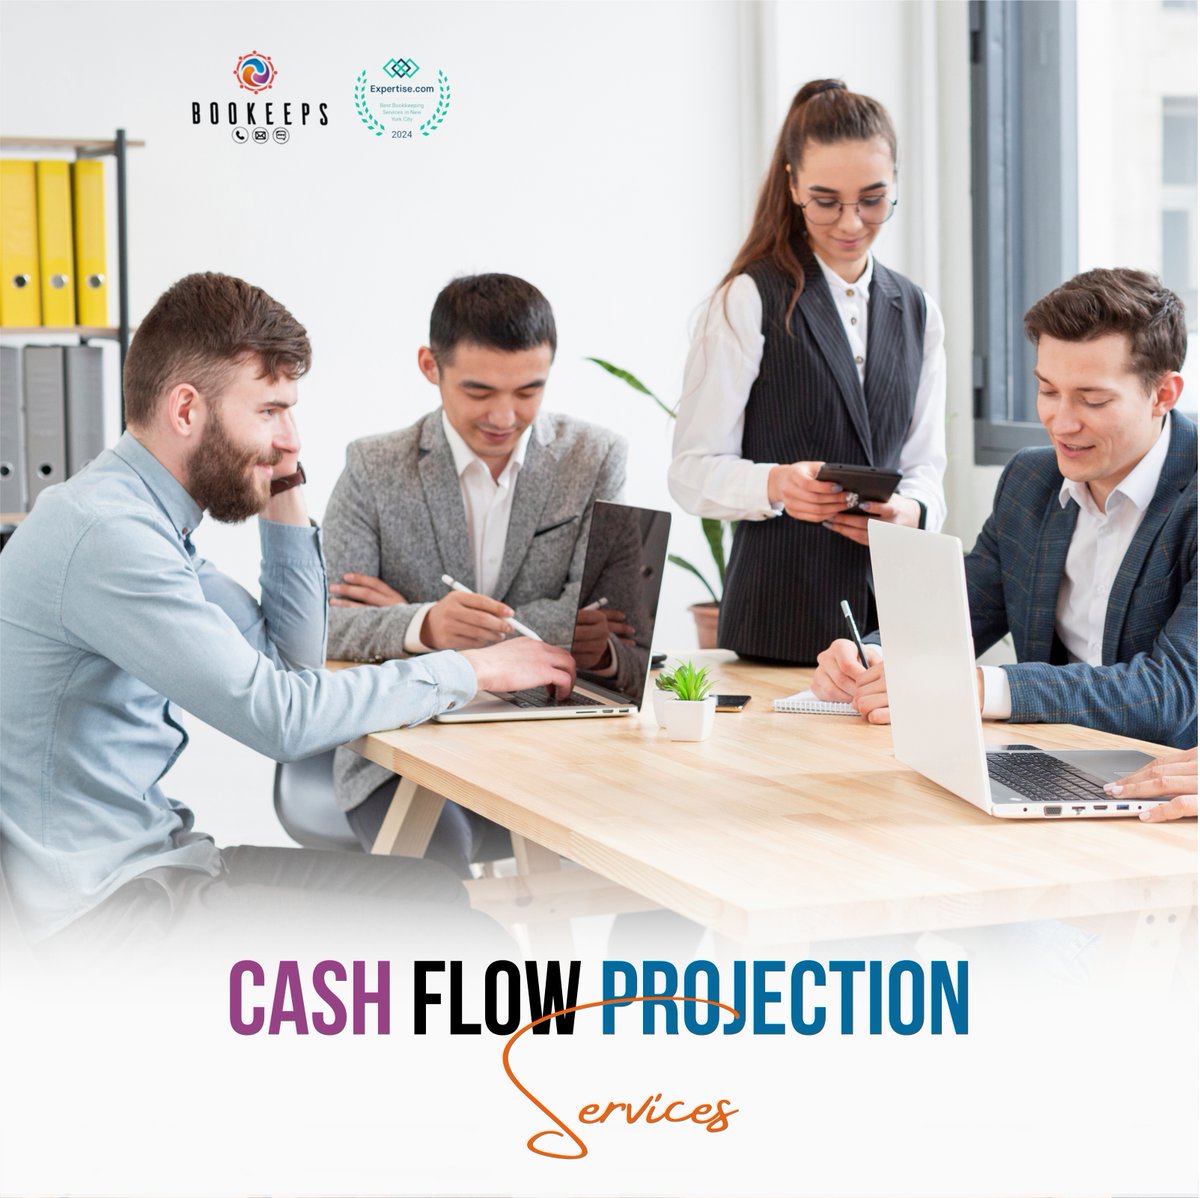 Cash flow is crucial for any business 💼, especially during tough times like recessions 📉. That's why we're here to help! 💡 Our innovative staff augmentation and outsourcing techniques ensure that your company stays cash healthy 💰. 

#CashFlowManagement #BusinessResilience